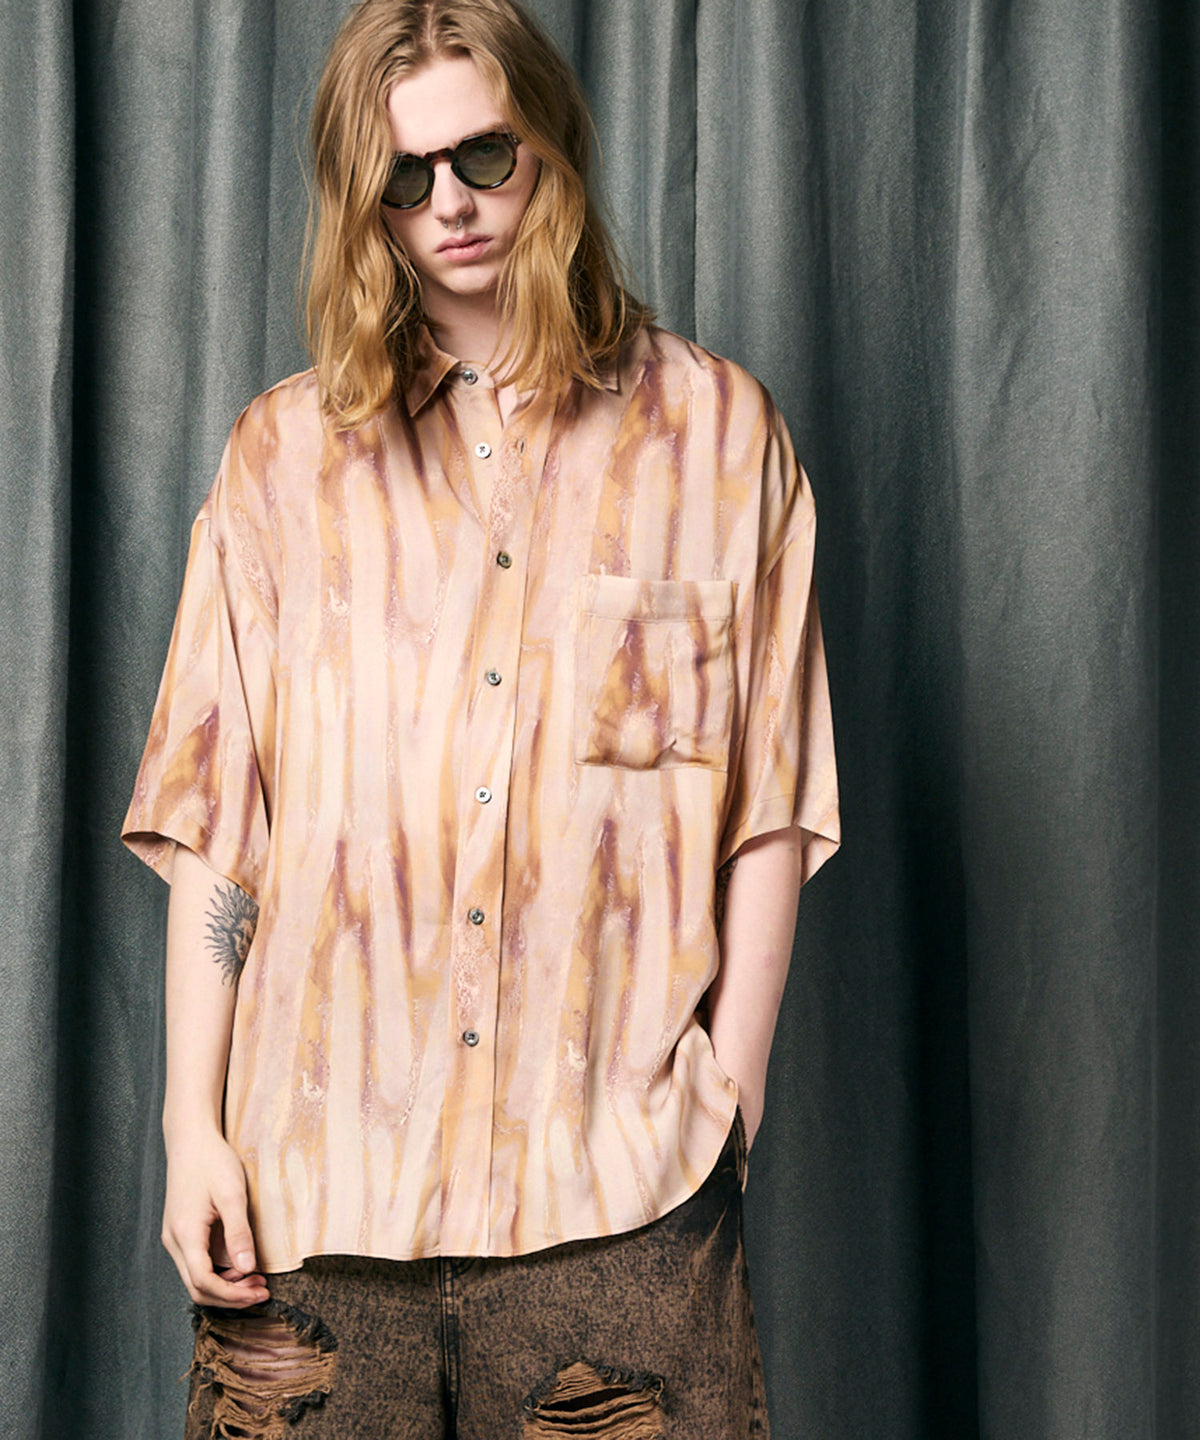 【LIMITED EDITION】Prime-Over Short Sleeve Shirt